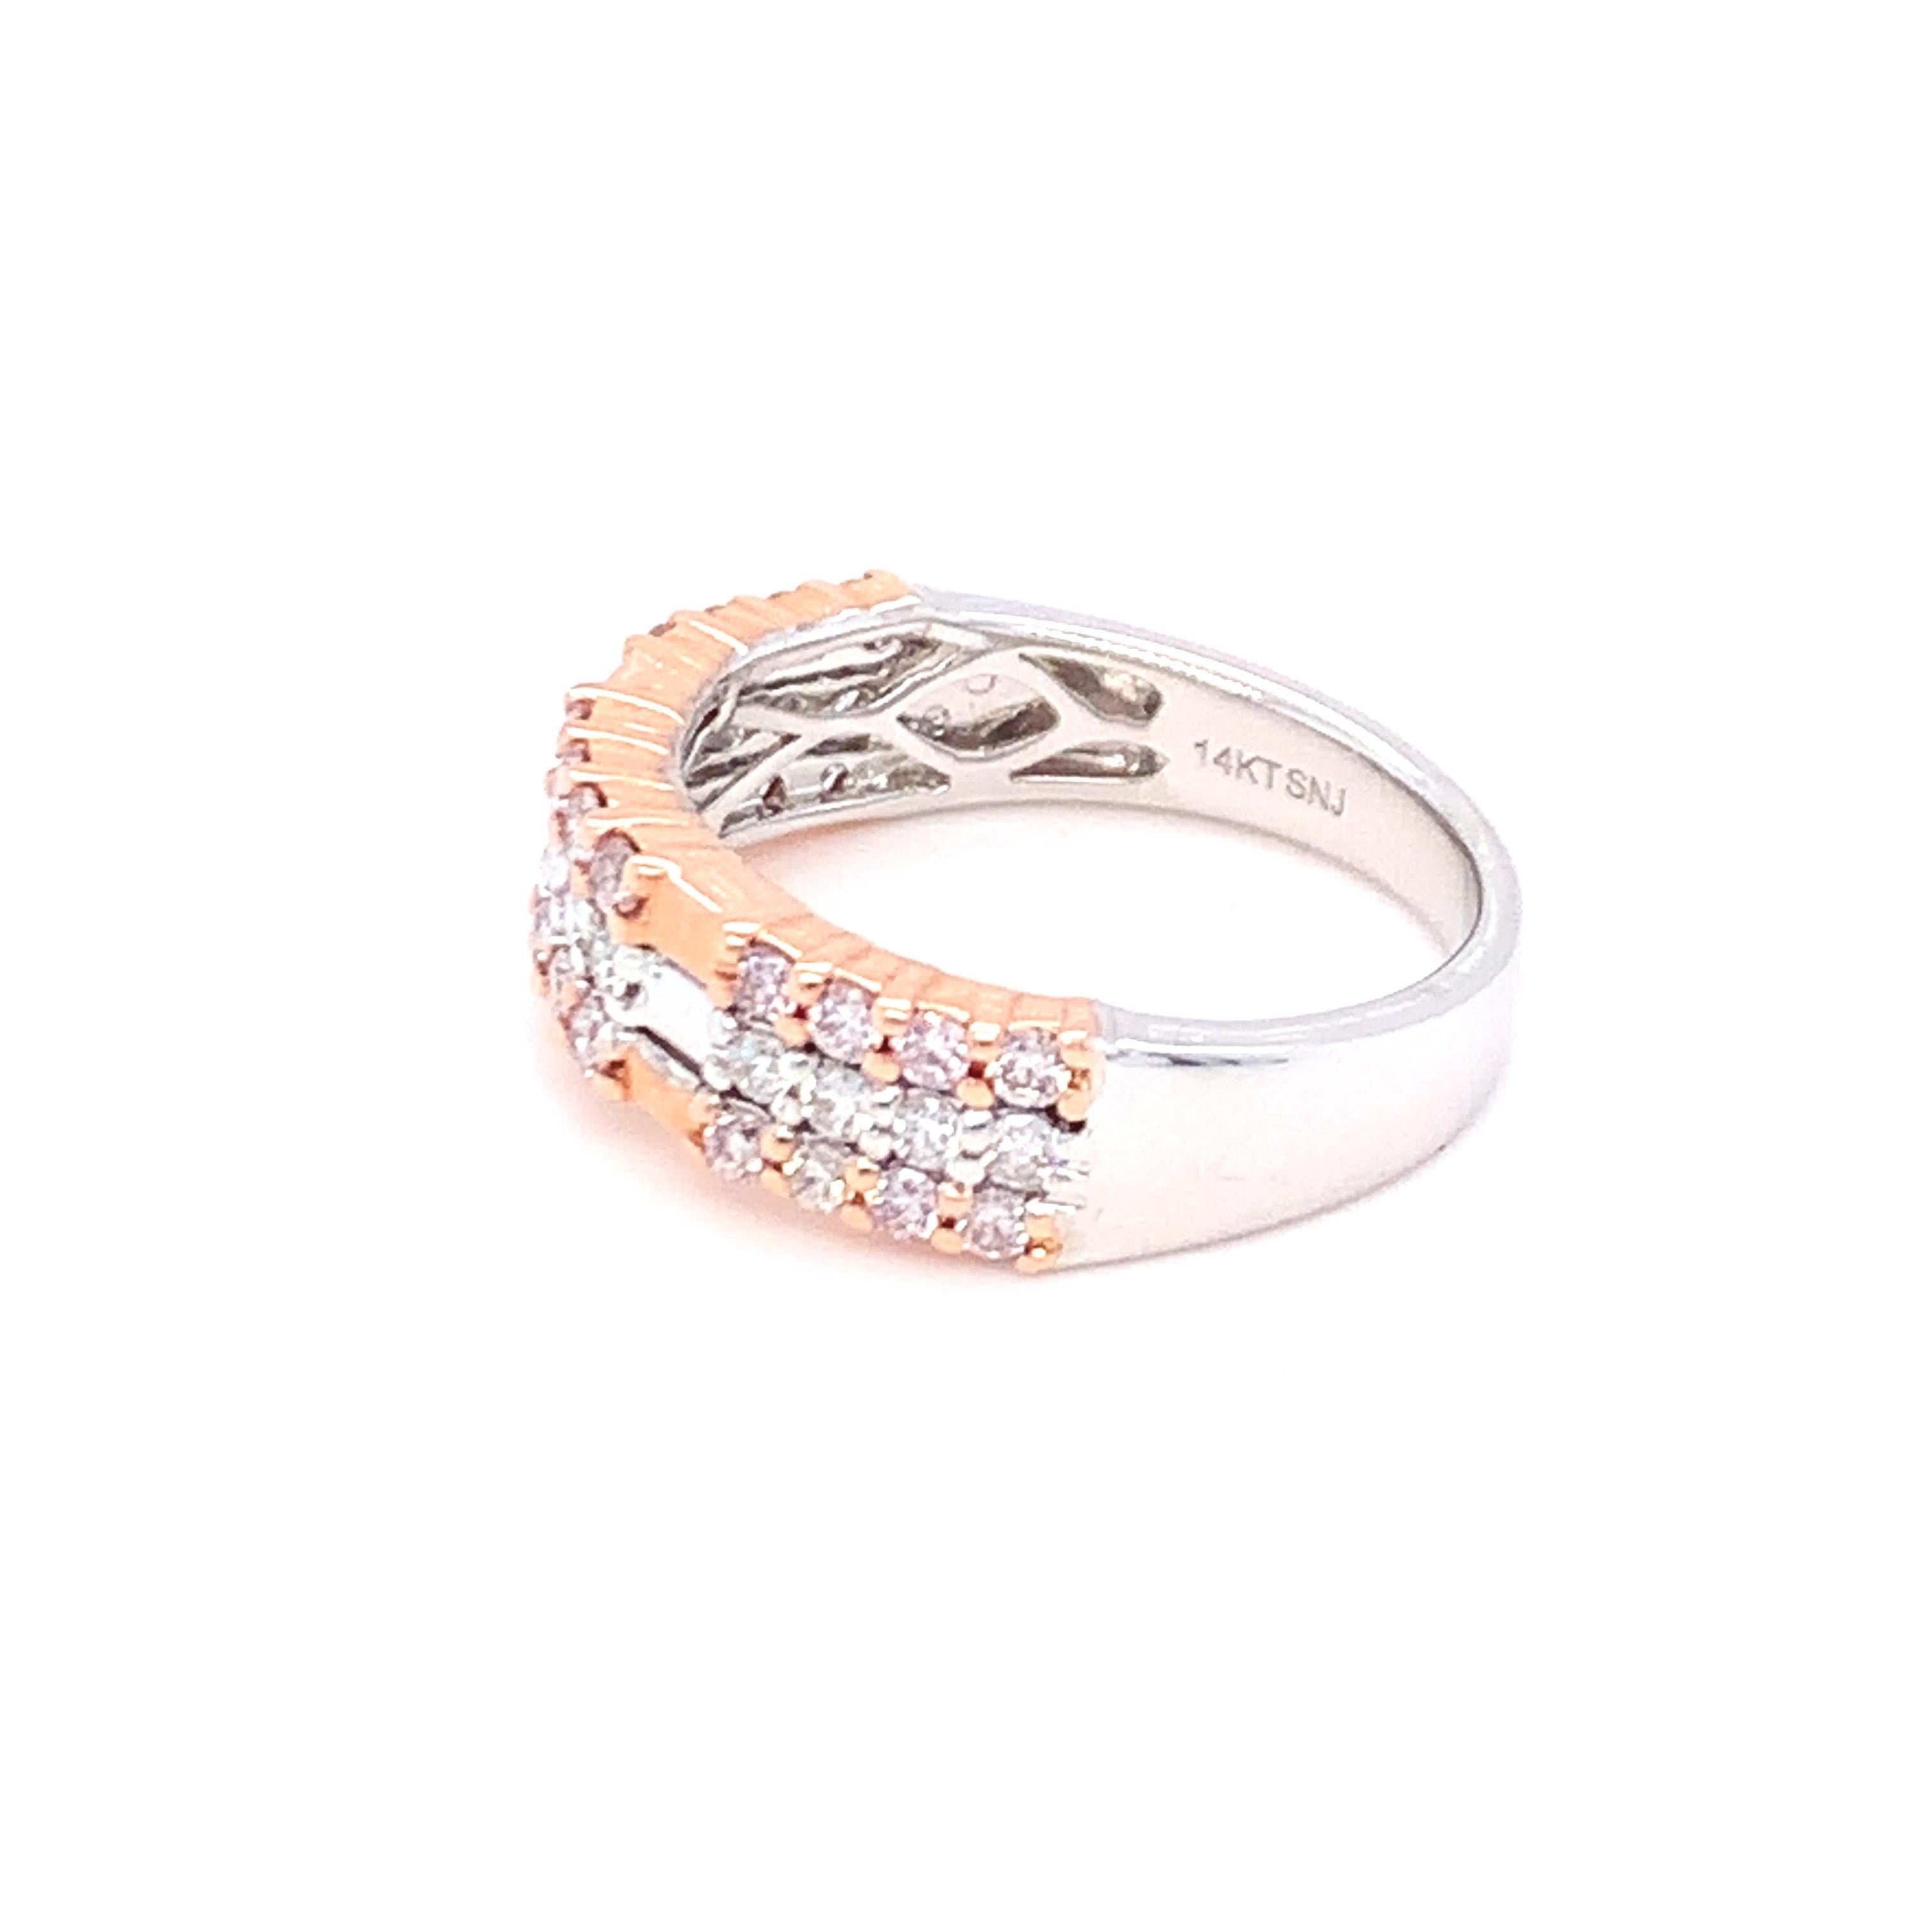 A perfect blend of pink and white diamonds in three rows makes this band a tribute to modern bold women. Set in two tone gold and carefully finished with skilled hands.
Pink Diamond: 0.46ct
White Diamond: 0.23ct
Gold: 14K Two Tone
Ring Size:7
